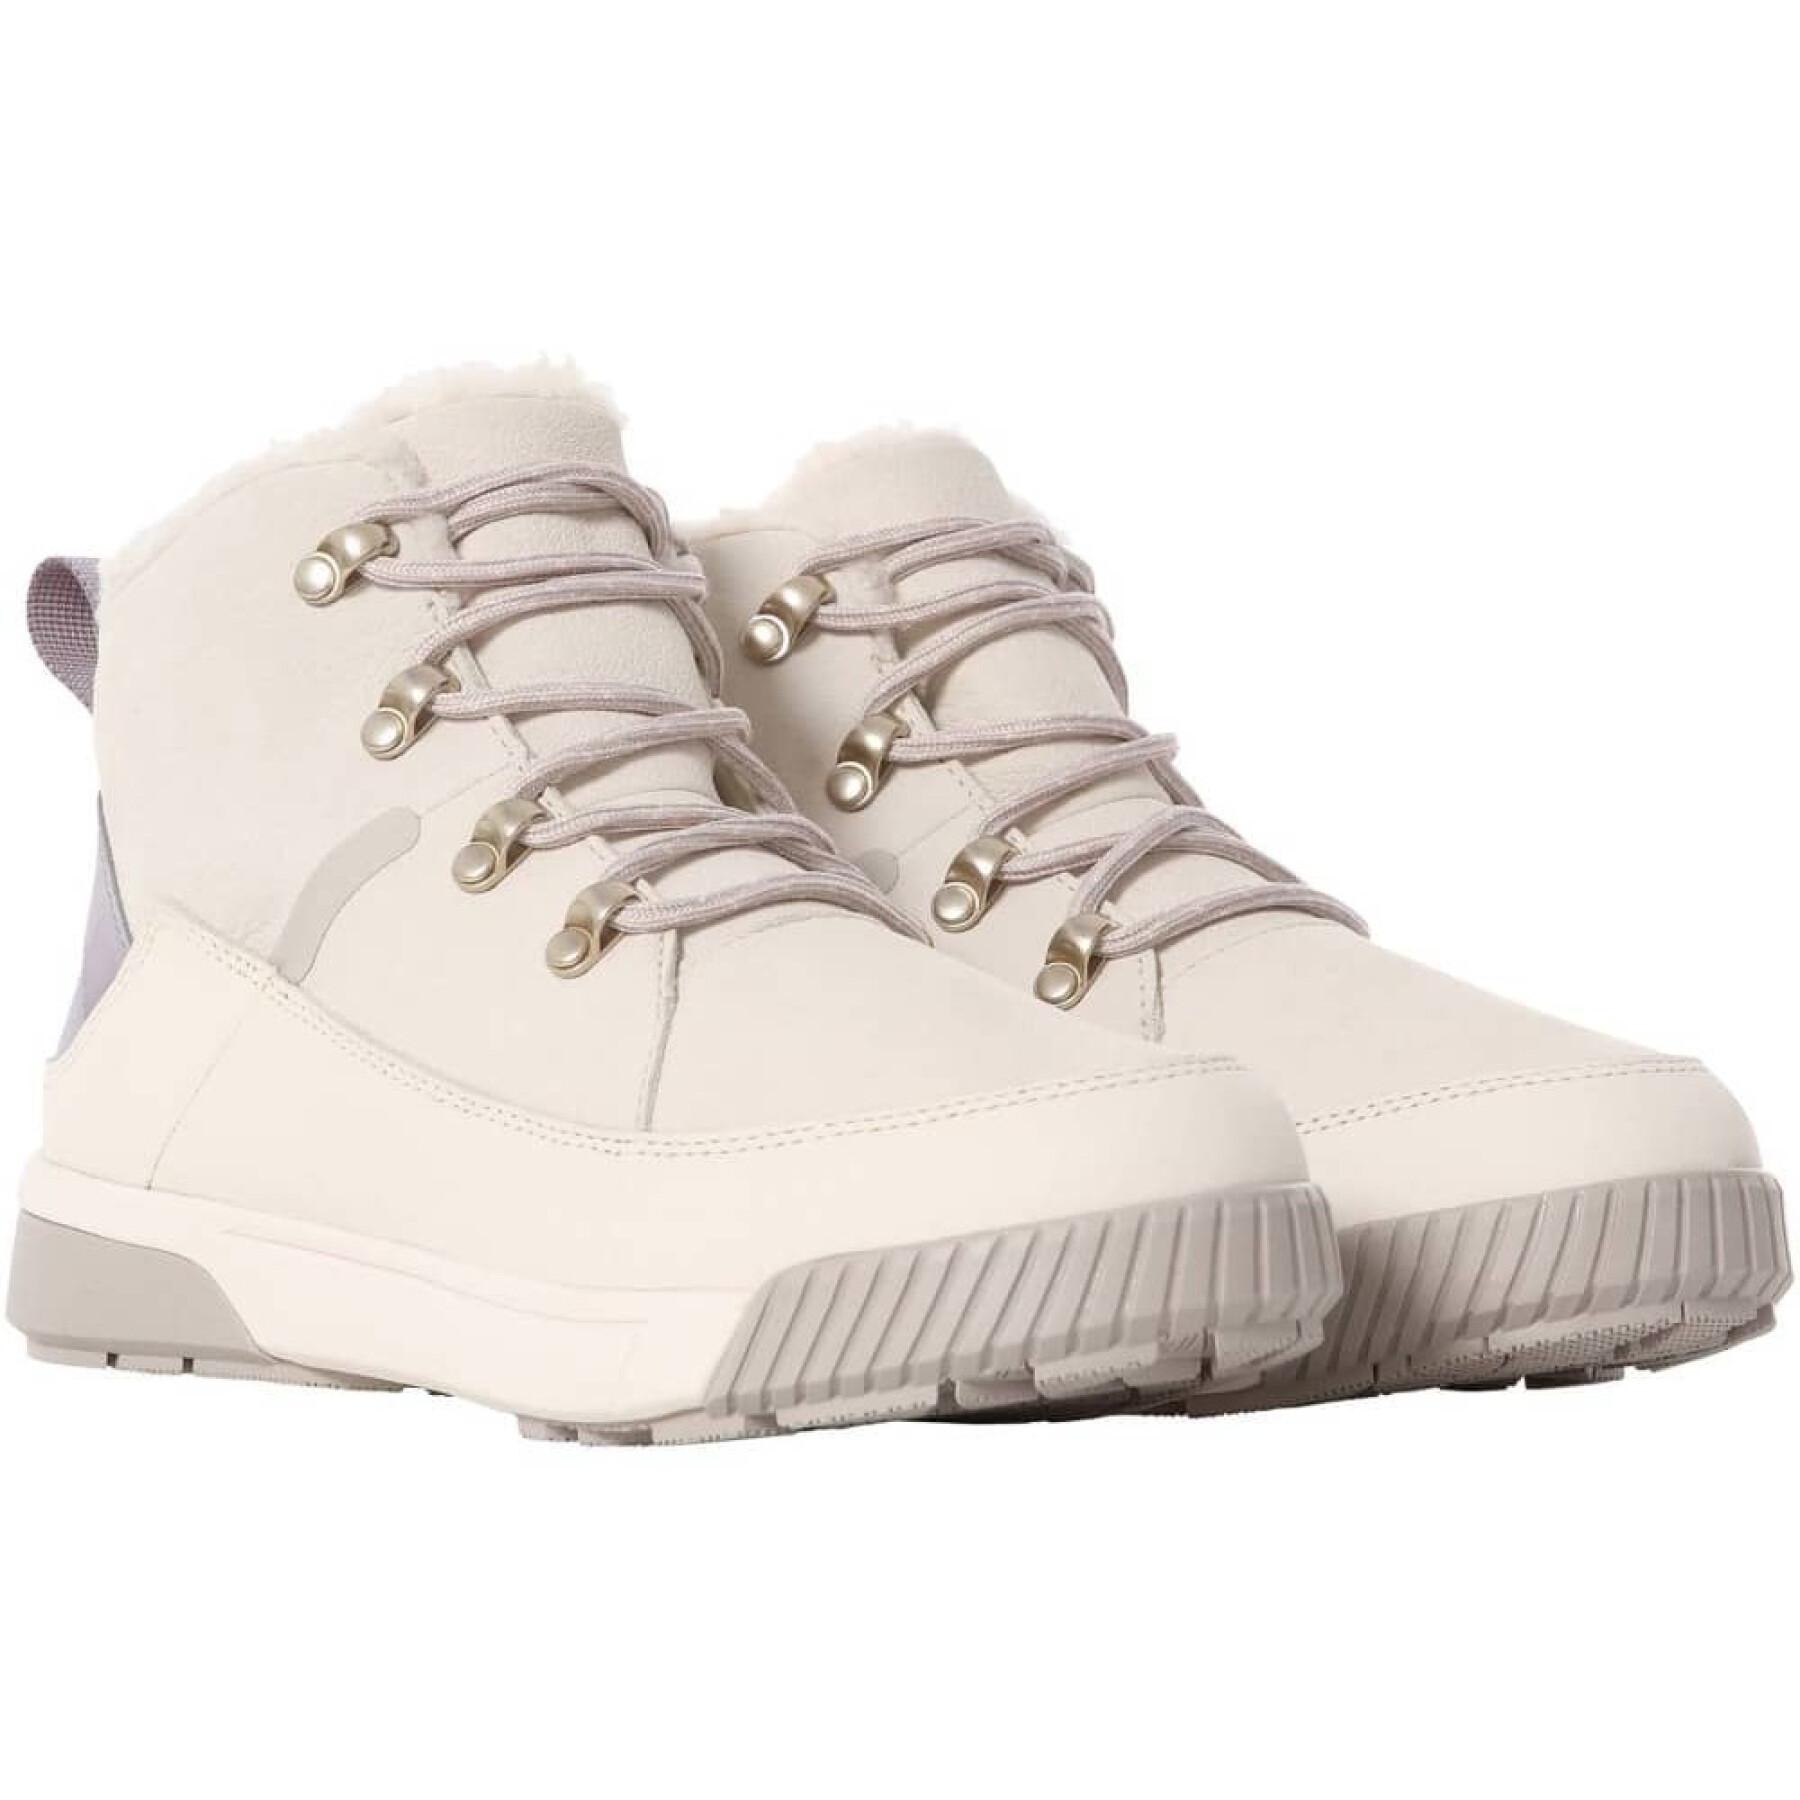 Women's boots The North Face Sierra mid lace